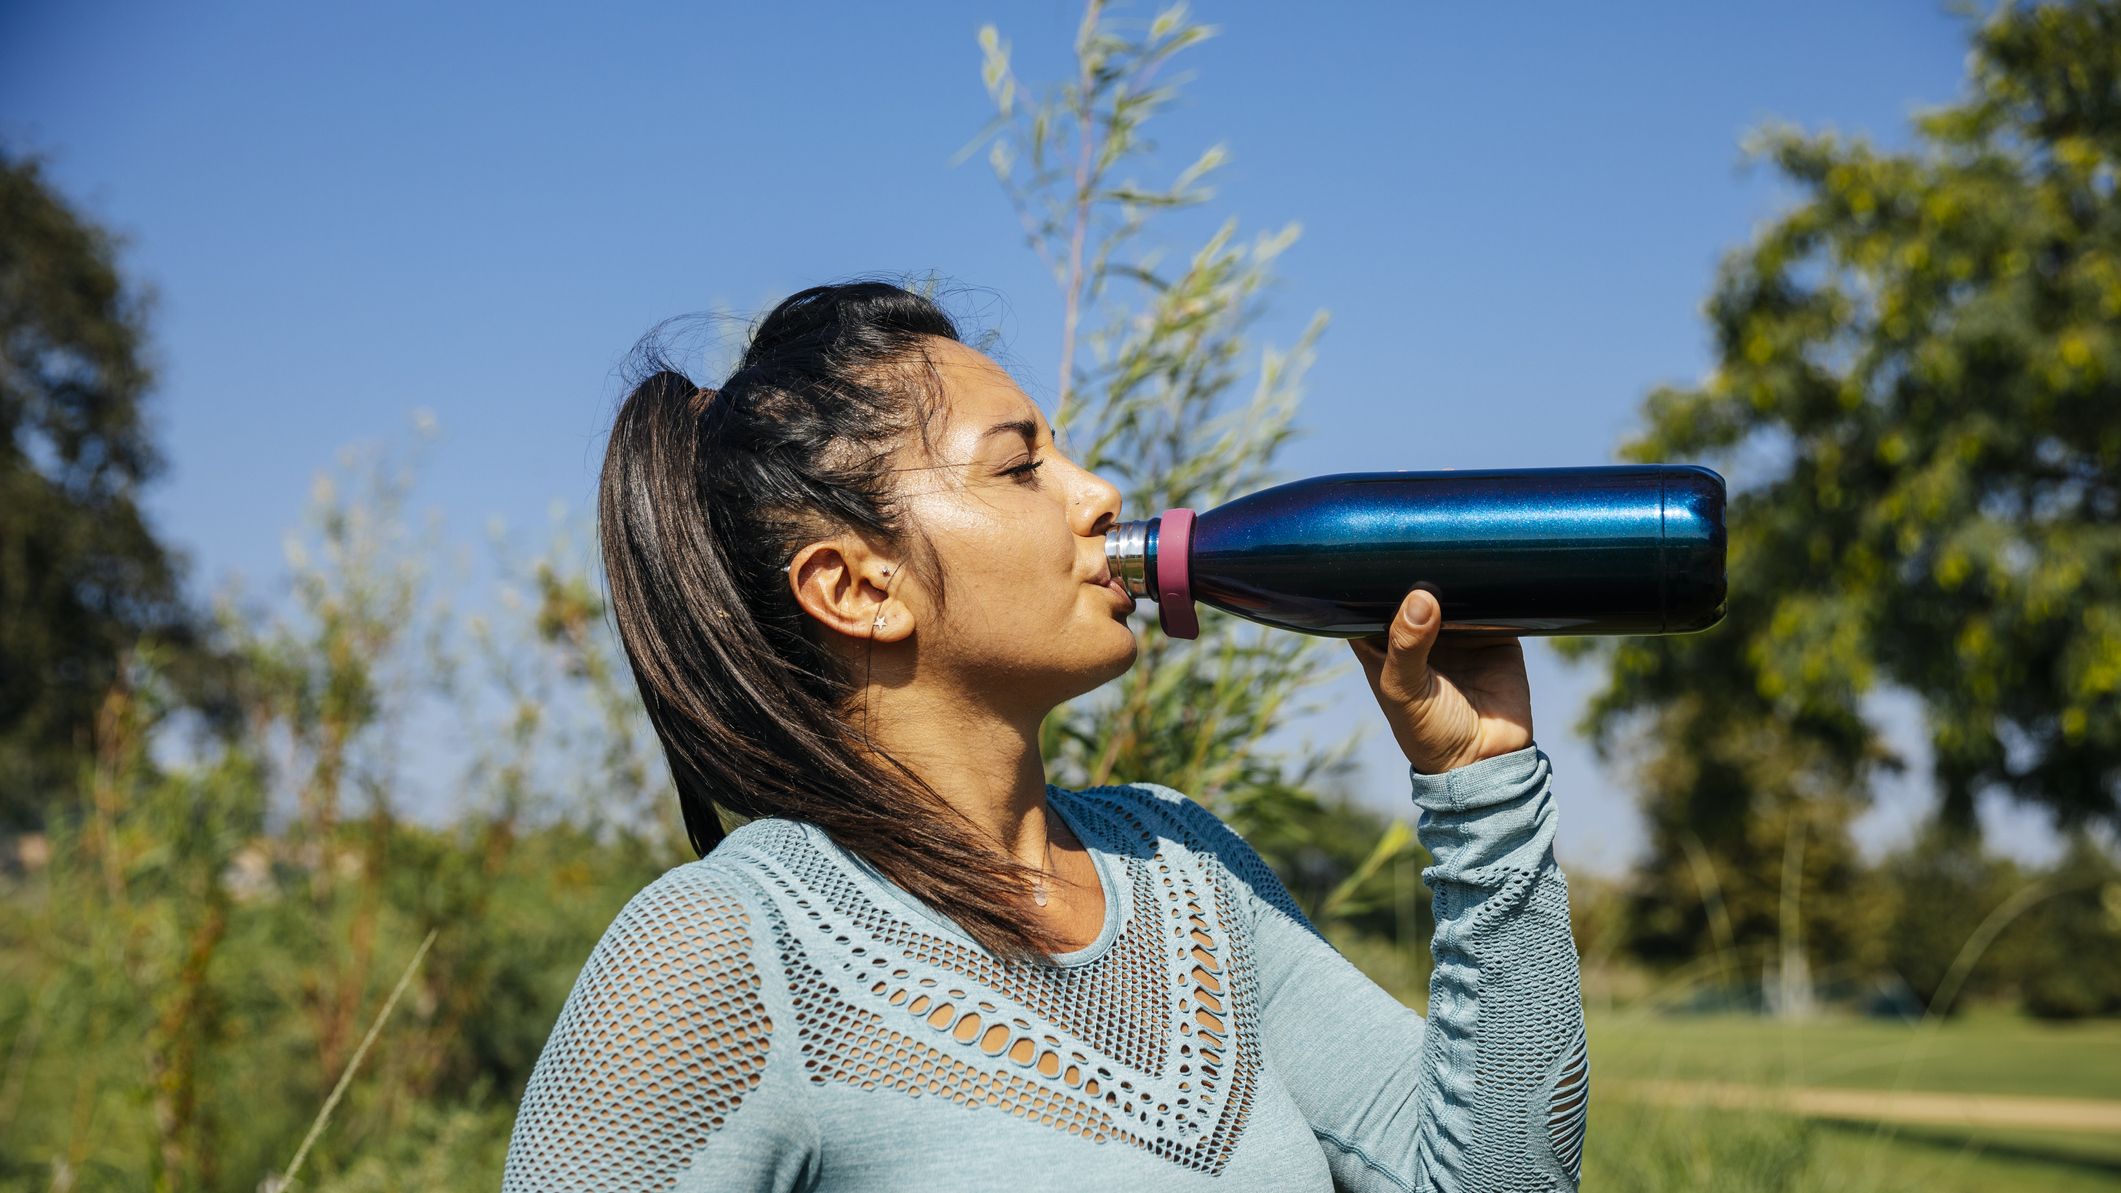 https://hips.hearstapps.com/hmg-prod/images/mid-adult-woman-drinking-water-at-park-during-sunny-royalty-free-image-1646152435.jpg?crop=1xw:0.84375xh;center,top